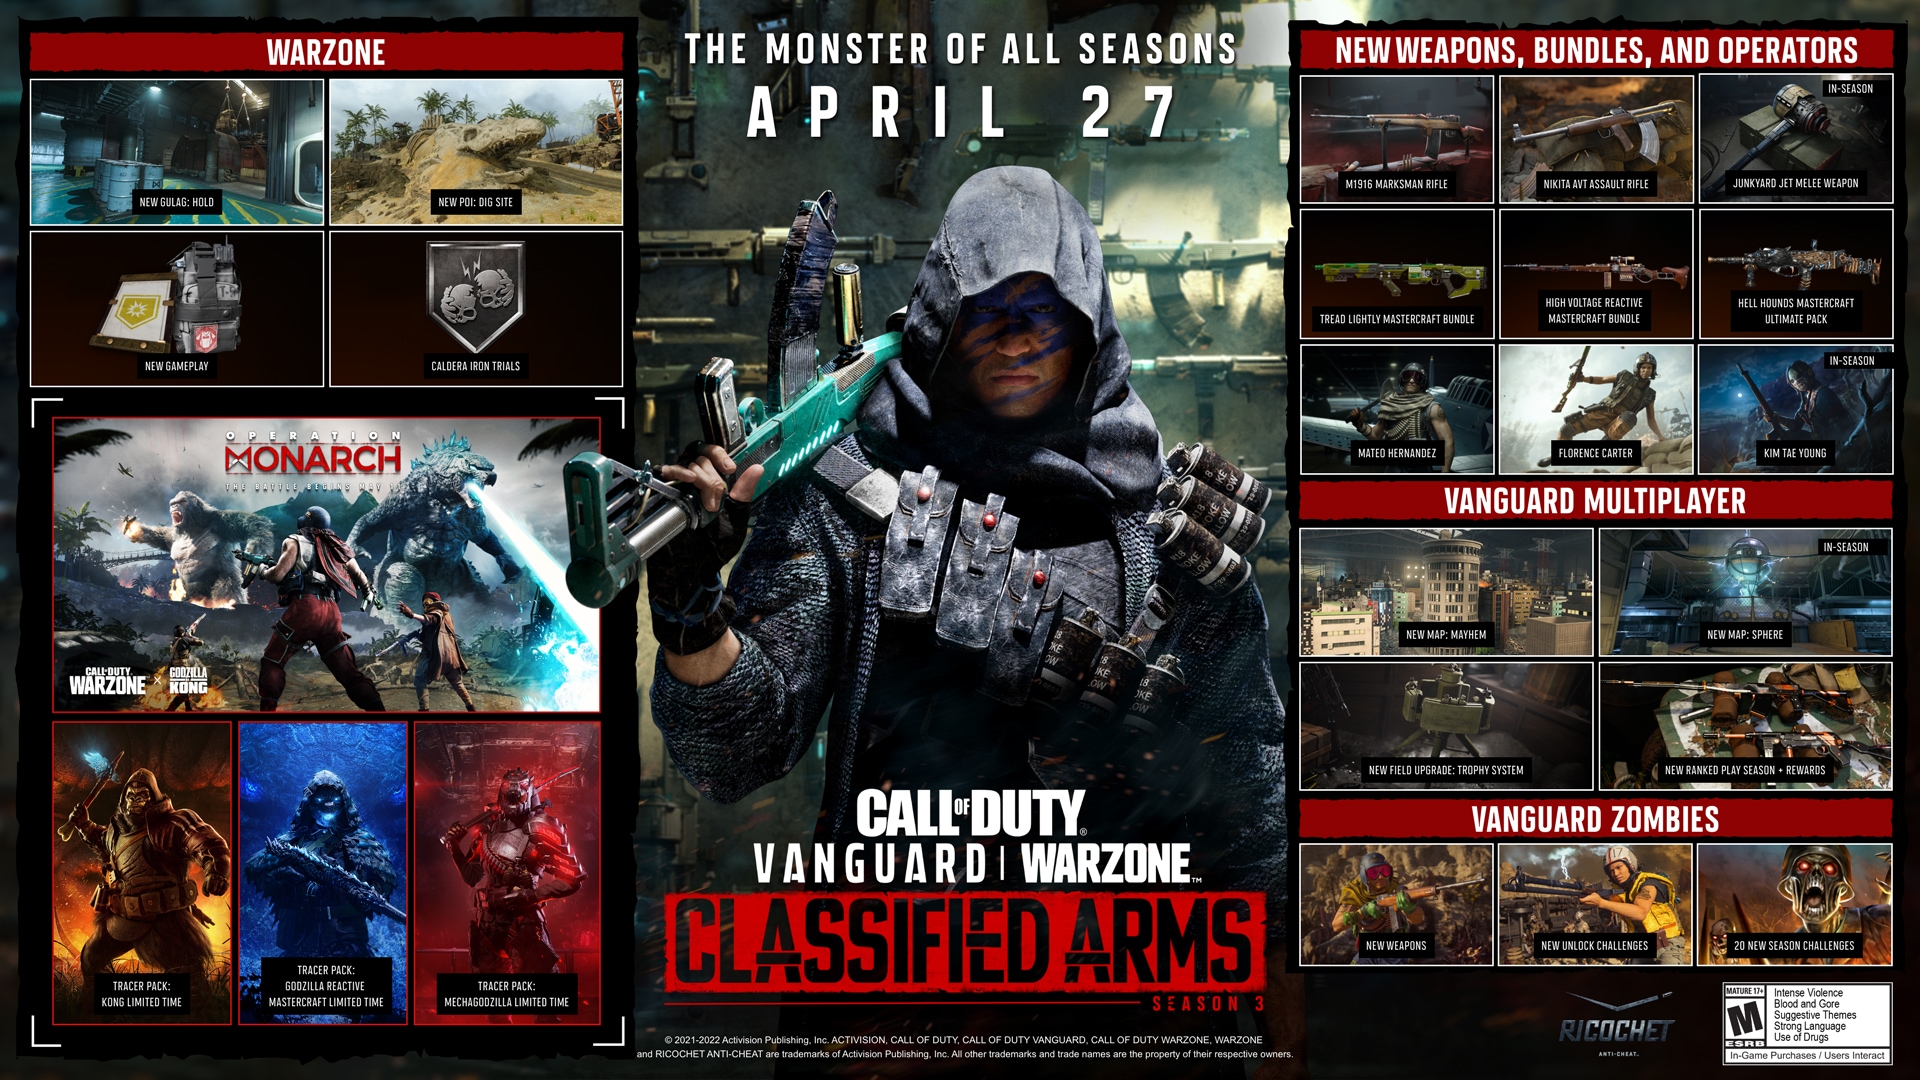 Call of Duty: Vanguard and Warzone: Classified Arms Season announcement